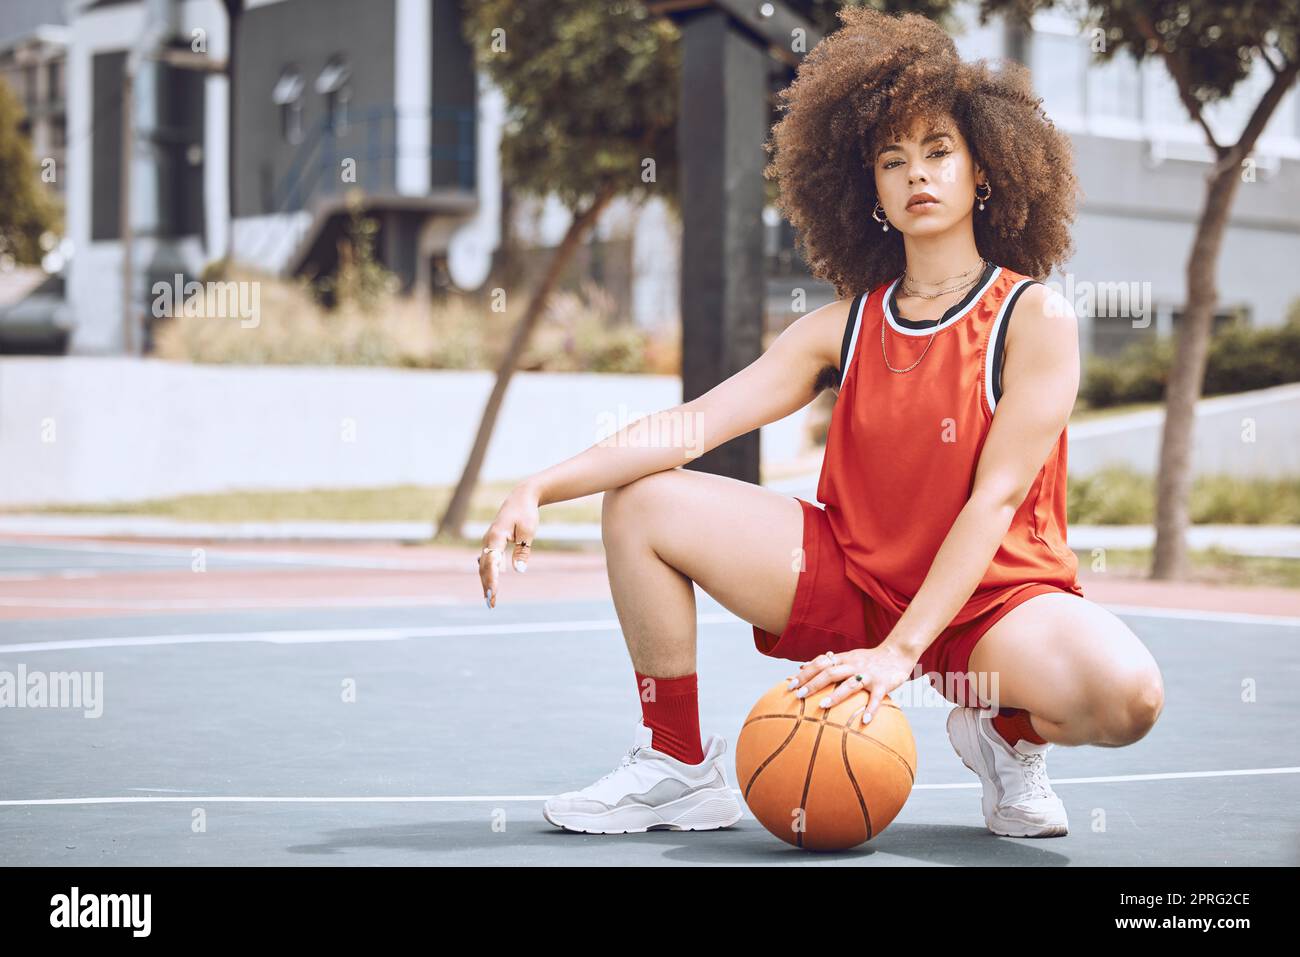 Basketball court, sports and black woman with fashion living a healthy, fitness and exercise culture lifestyle. Portrait of cool, swag and afro girl with wellness, natural beauty and empowerment Stock Photo